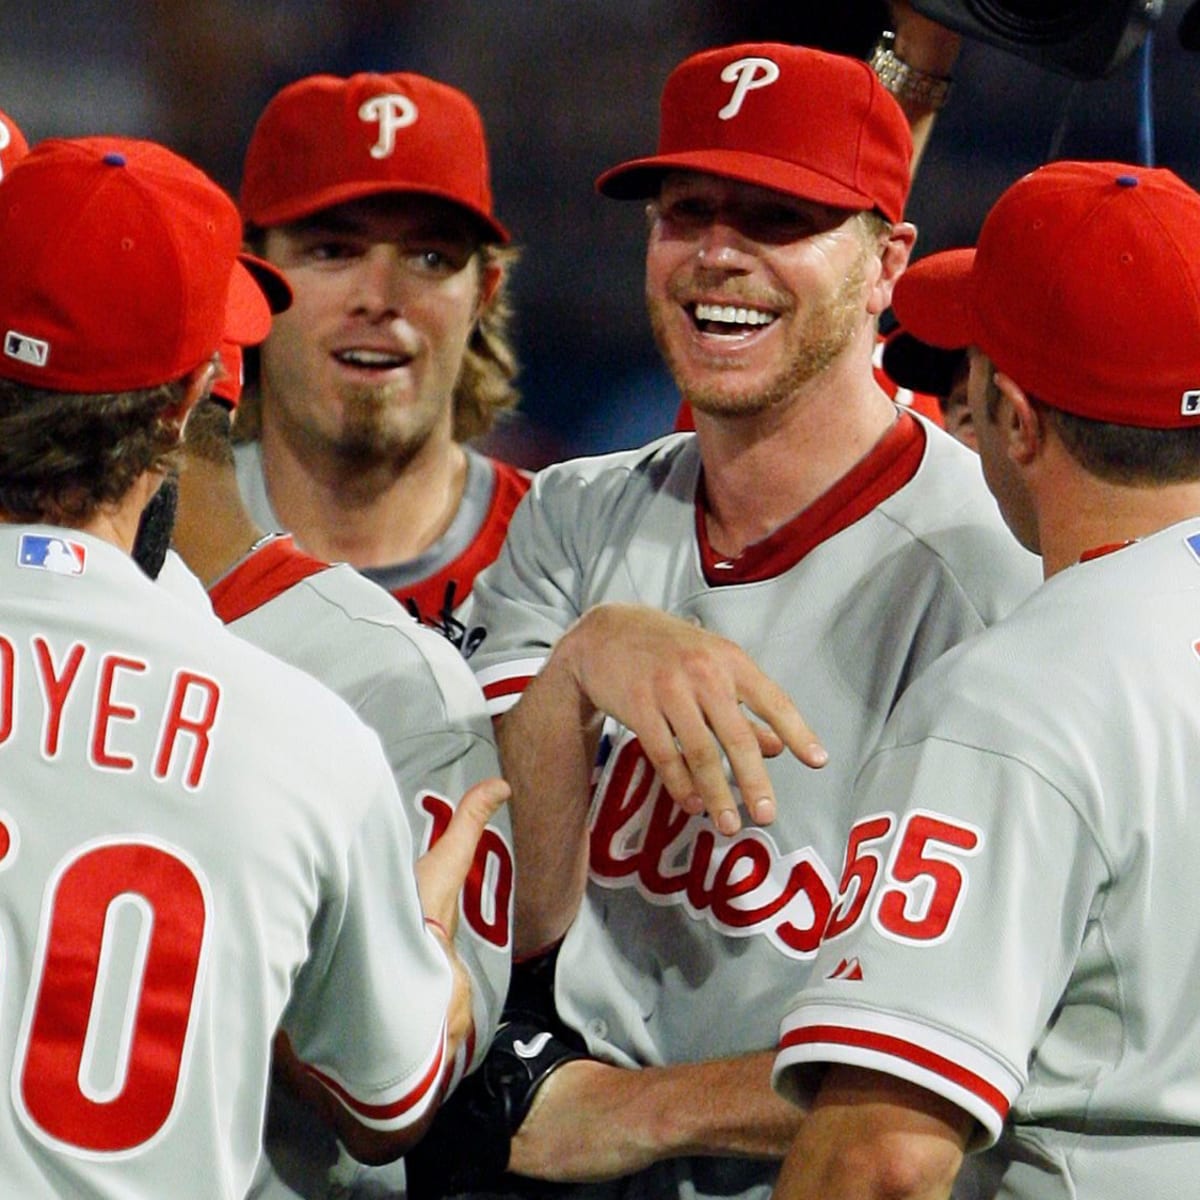 Roy Halladay's No. 34 jersey will be retired by Phillies on